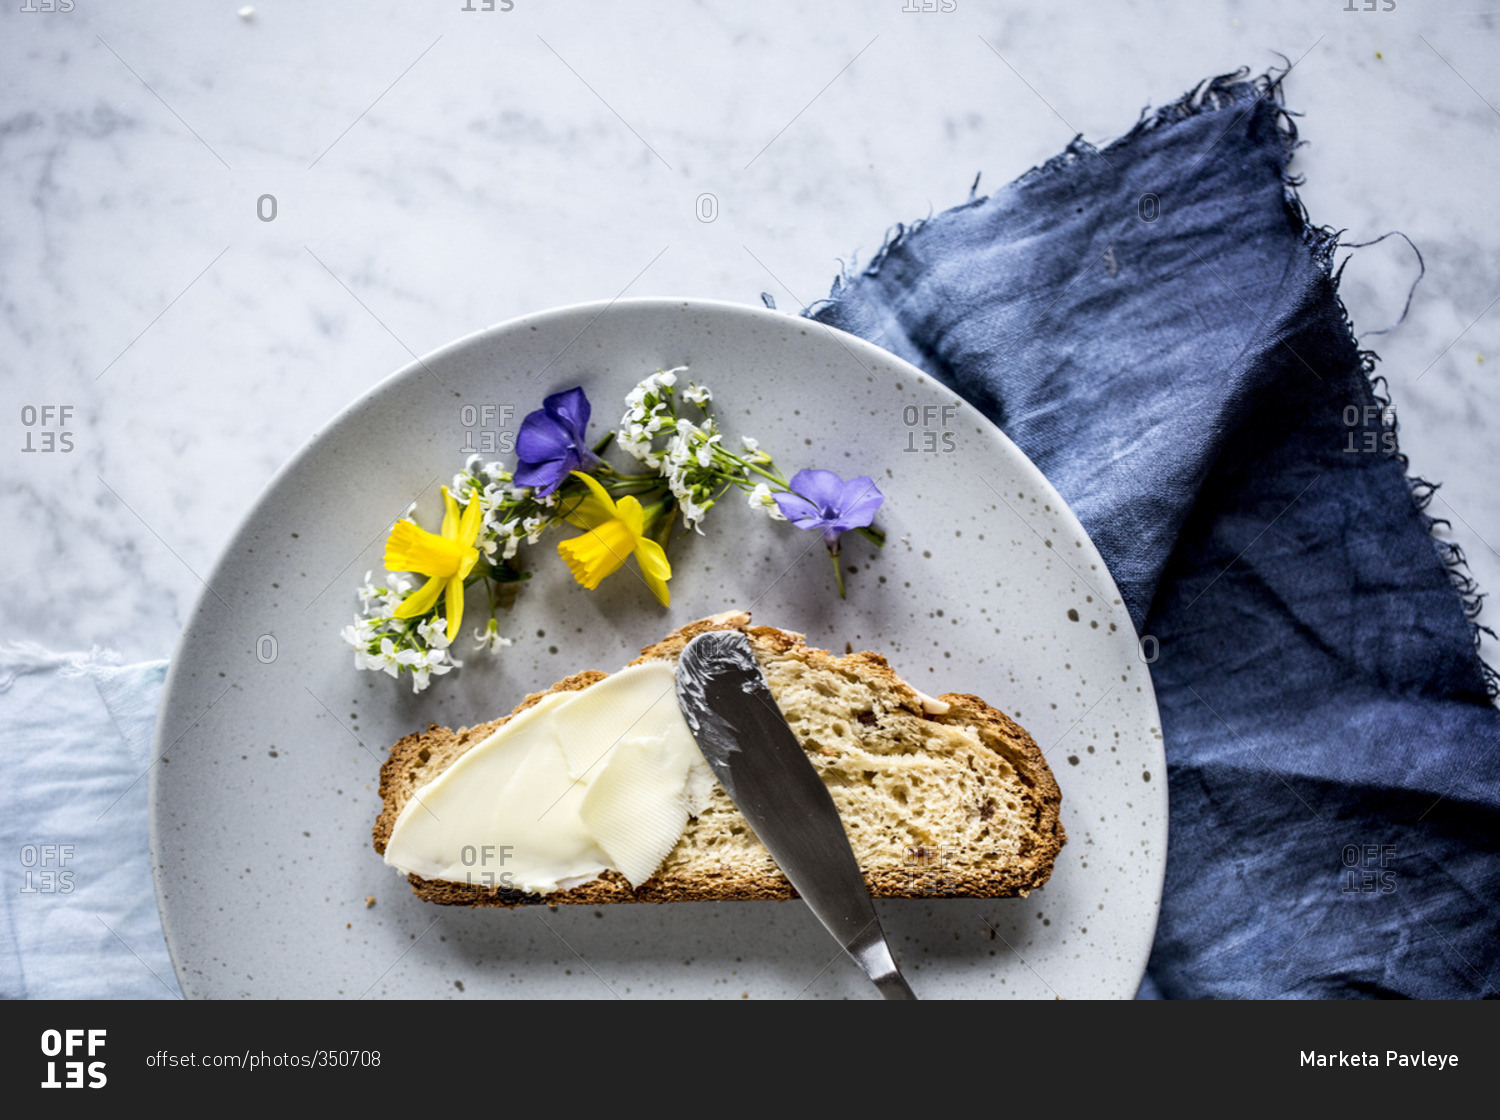 Overhead view of plate of slice of bread with butter and spring flowers